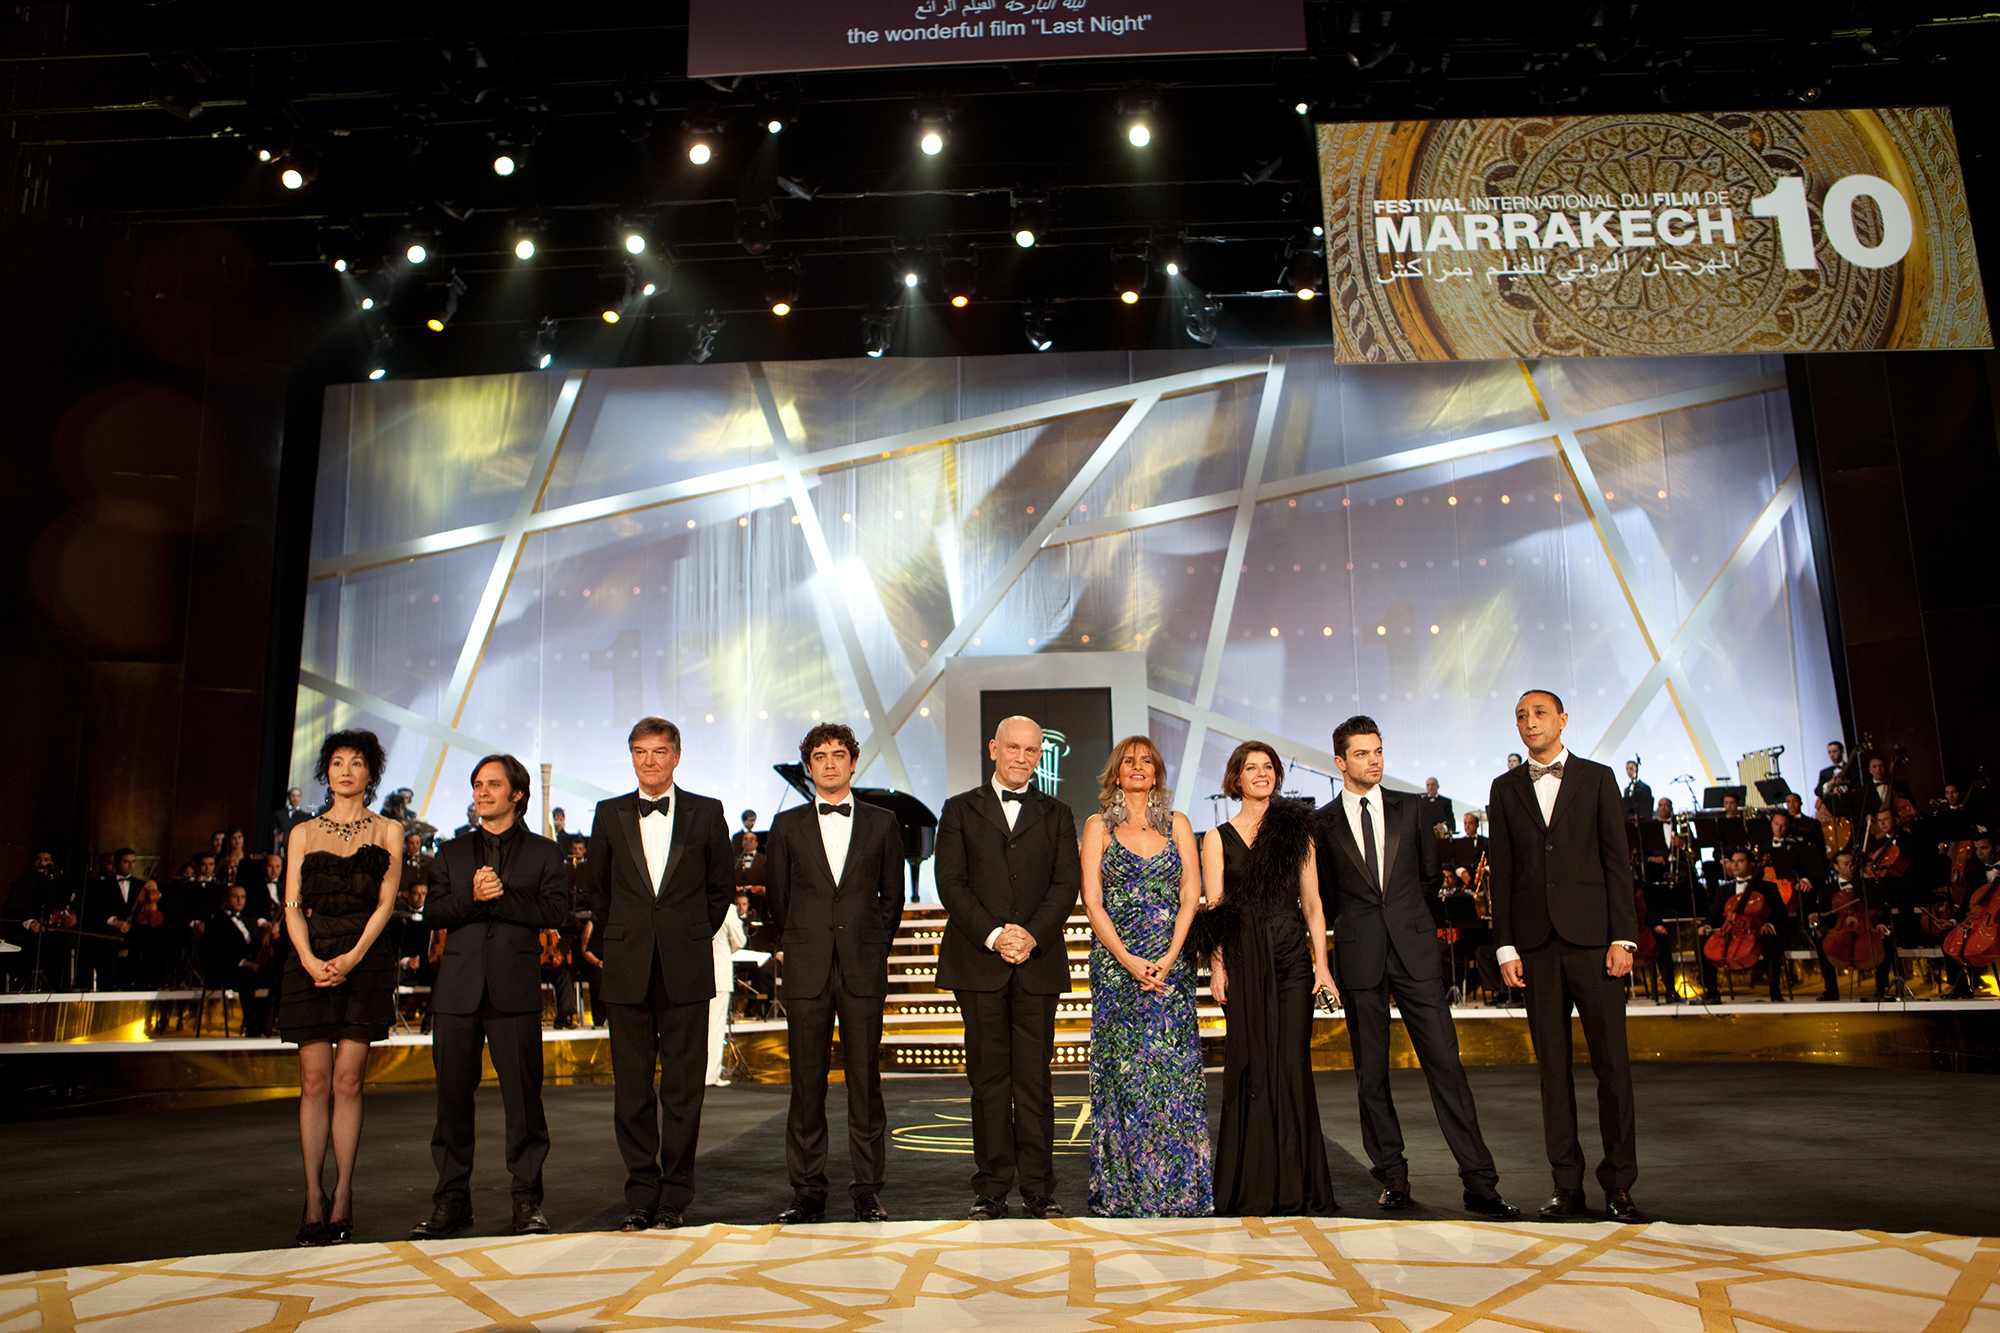 Jury of the 10th edition of Marrakech festival